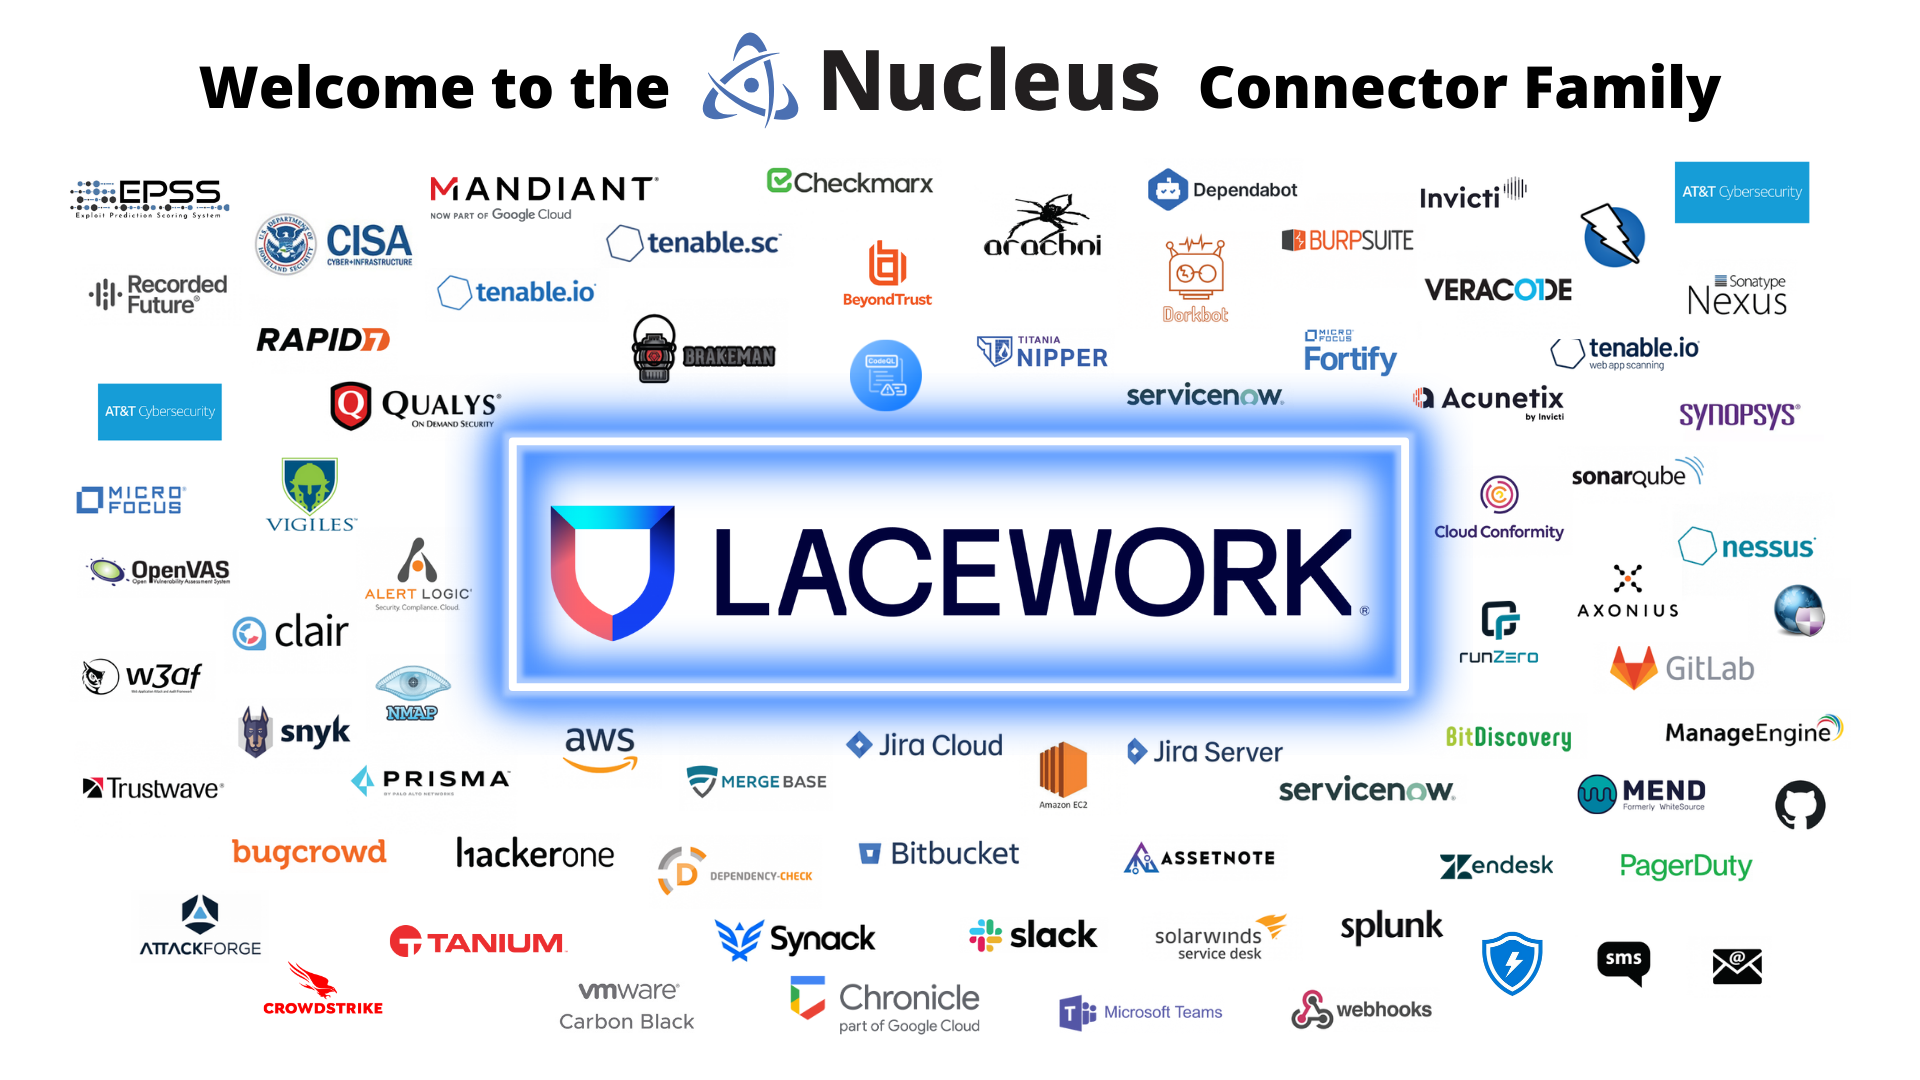 Welcome to the Nucleus Connector Family